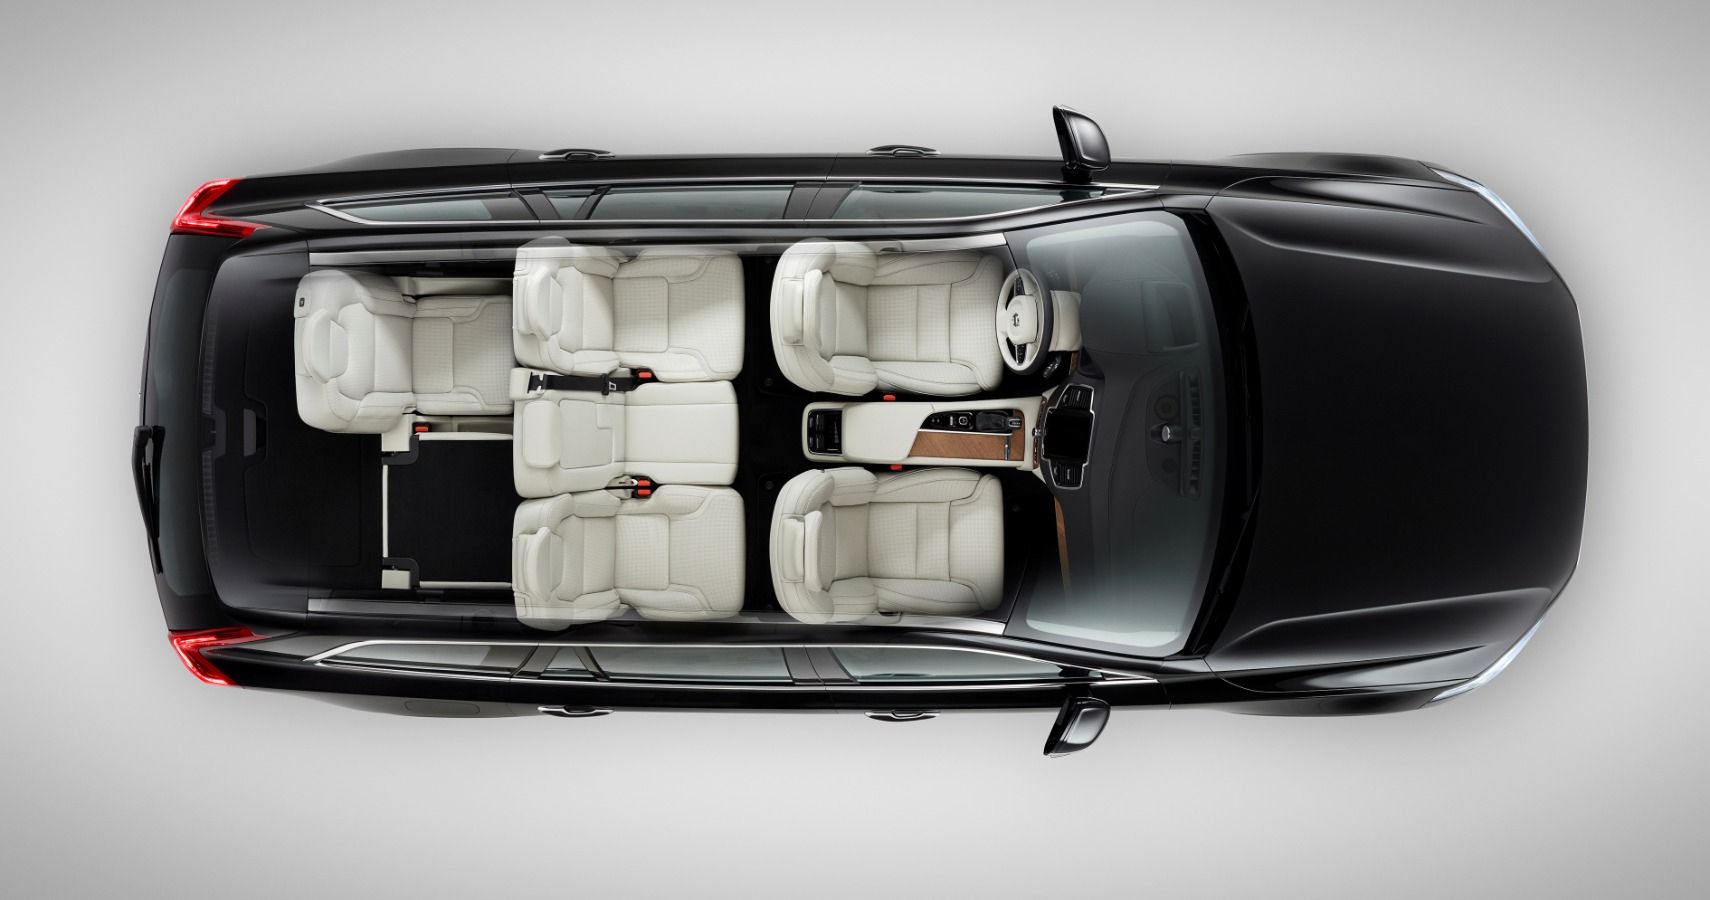 2-Stage Integrated Booster Cushion In The All-New V70 - Volvo Car